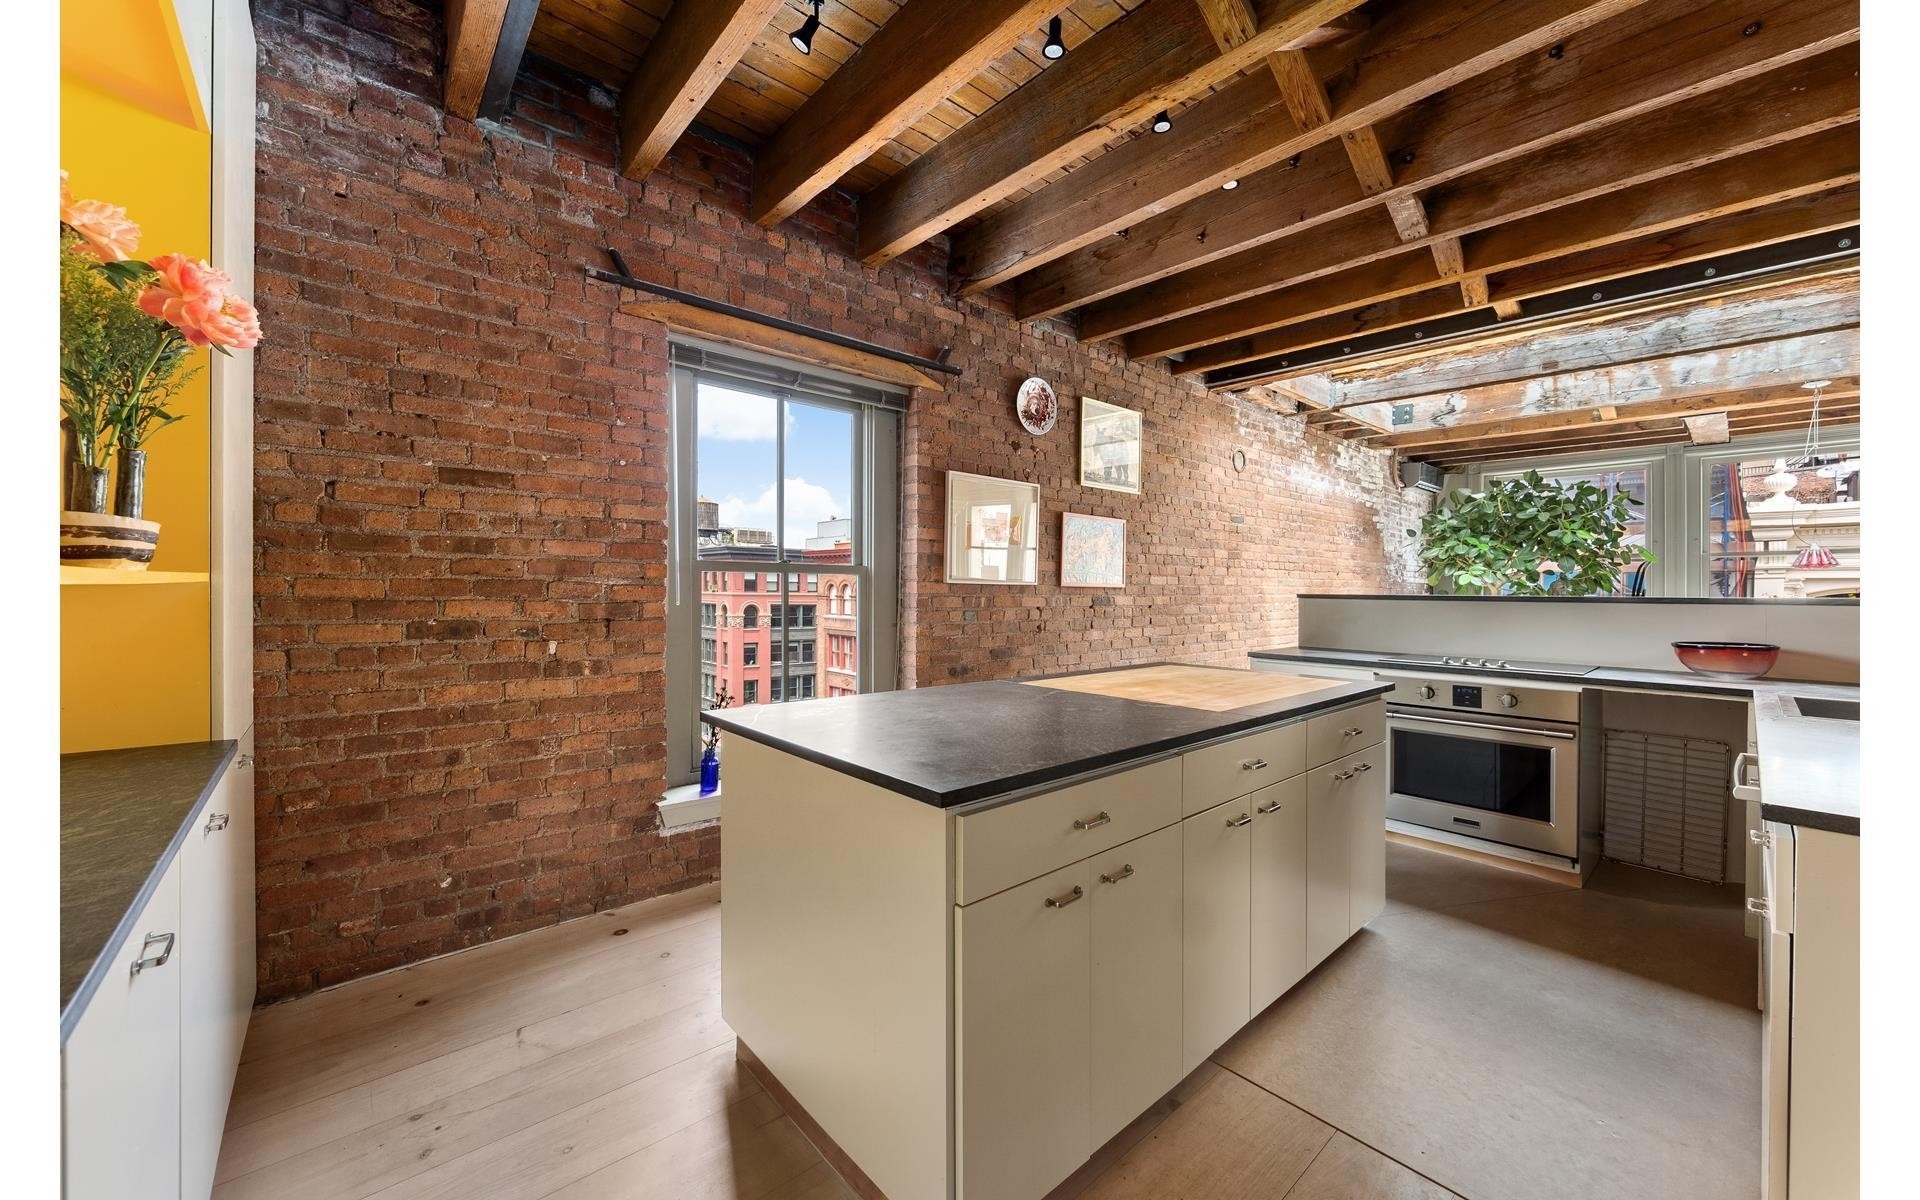 7. Co-op Properties for Sale at 112 PRINCE ST, 6 SoHo, New York, NY 10012